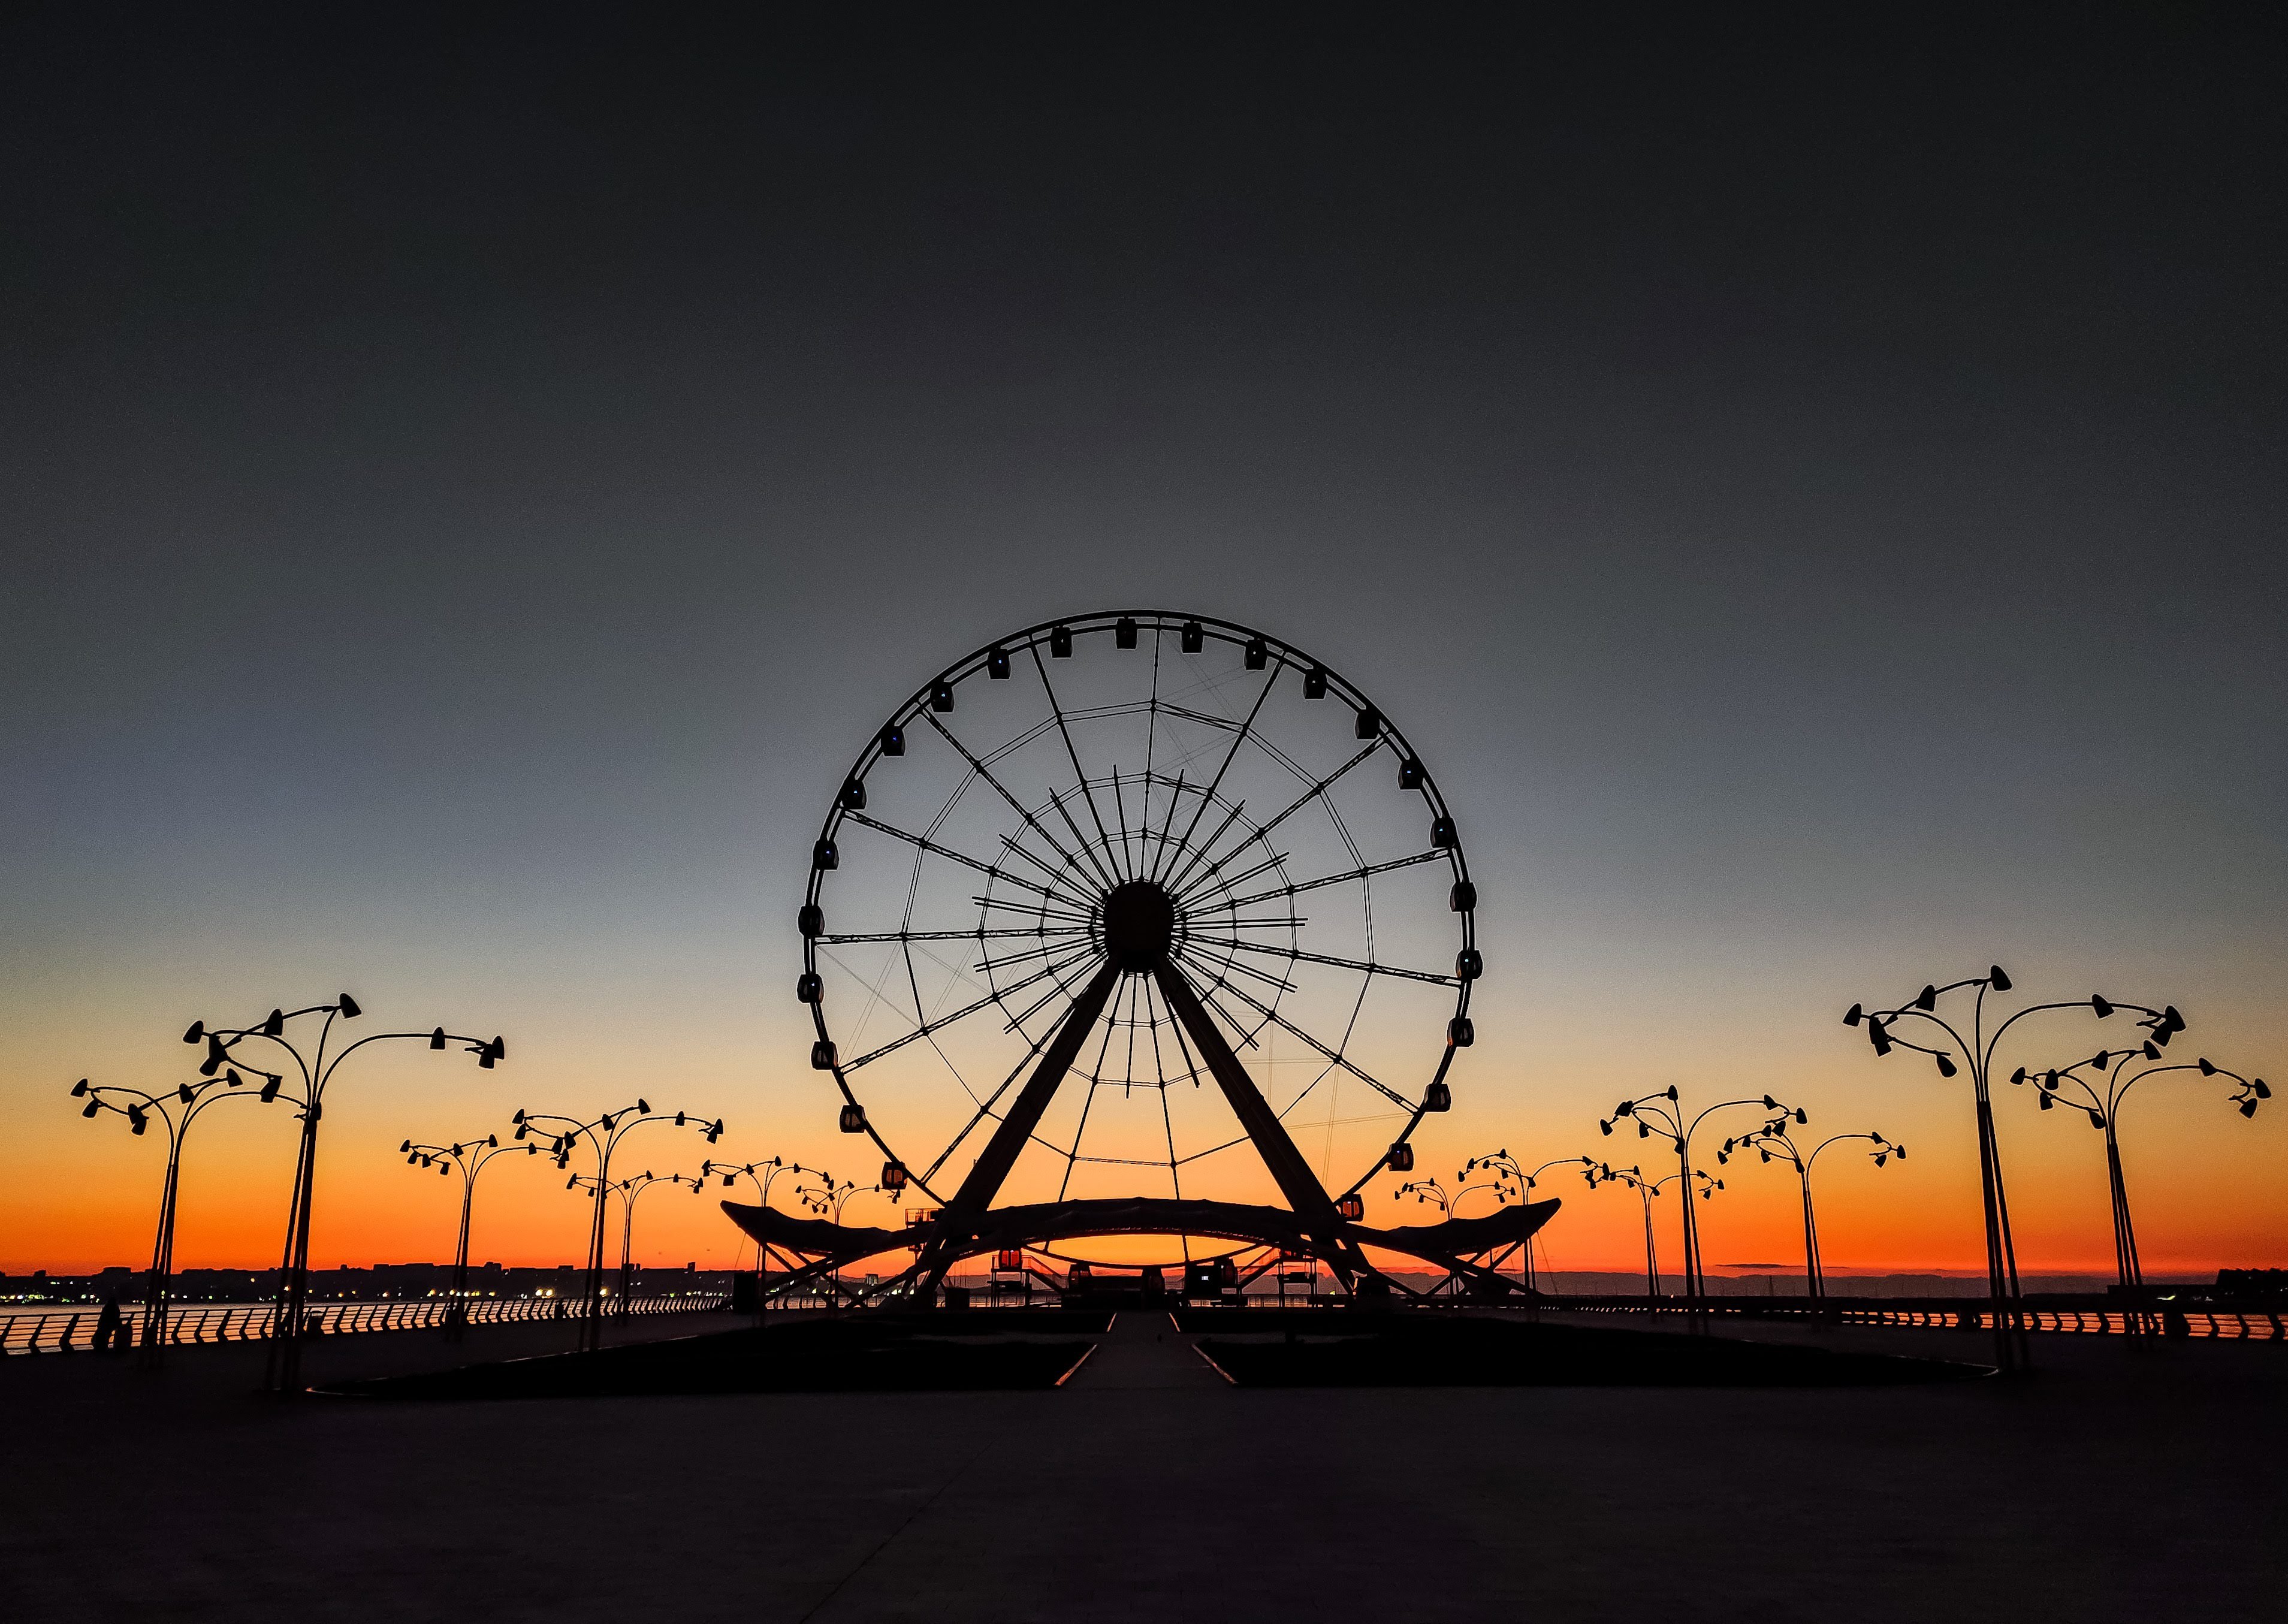 Download wallpaper 1350x2400 ferris wheel sky clouds iphone 876s6  for parallax hd background